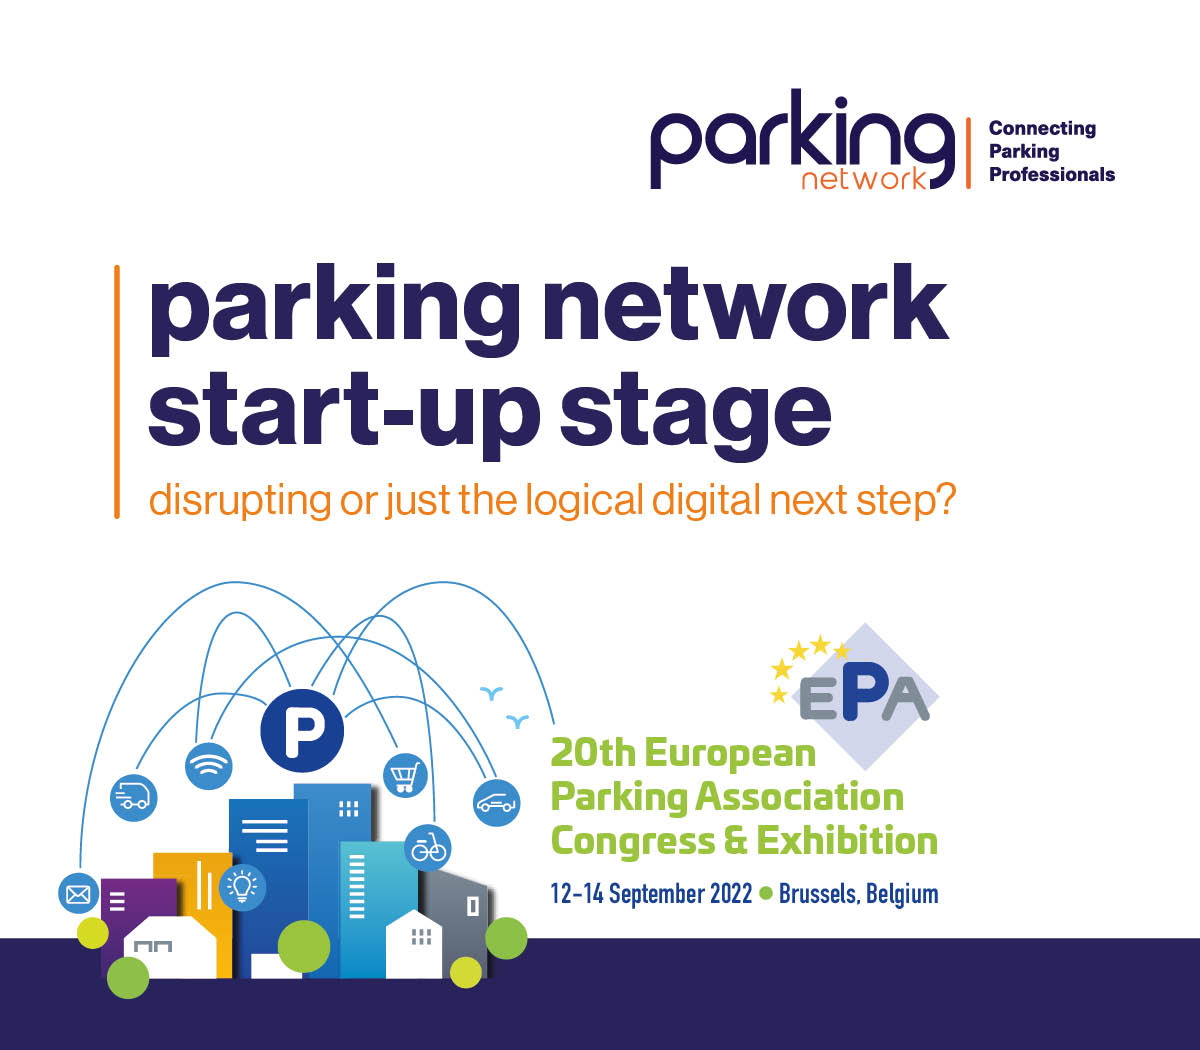 If you are looking for disruptive technologies, look no further than the Parking Network Start-Up Stage